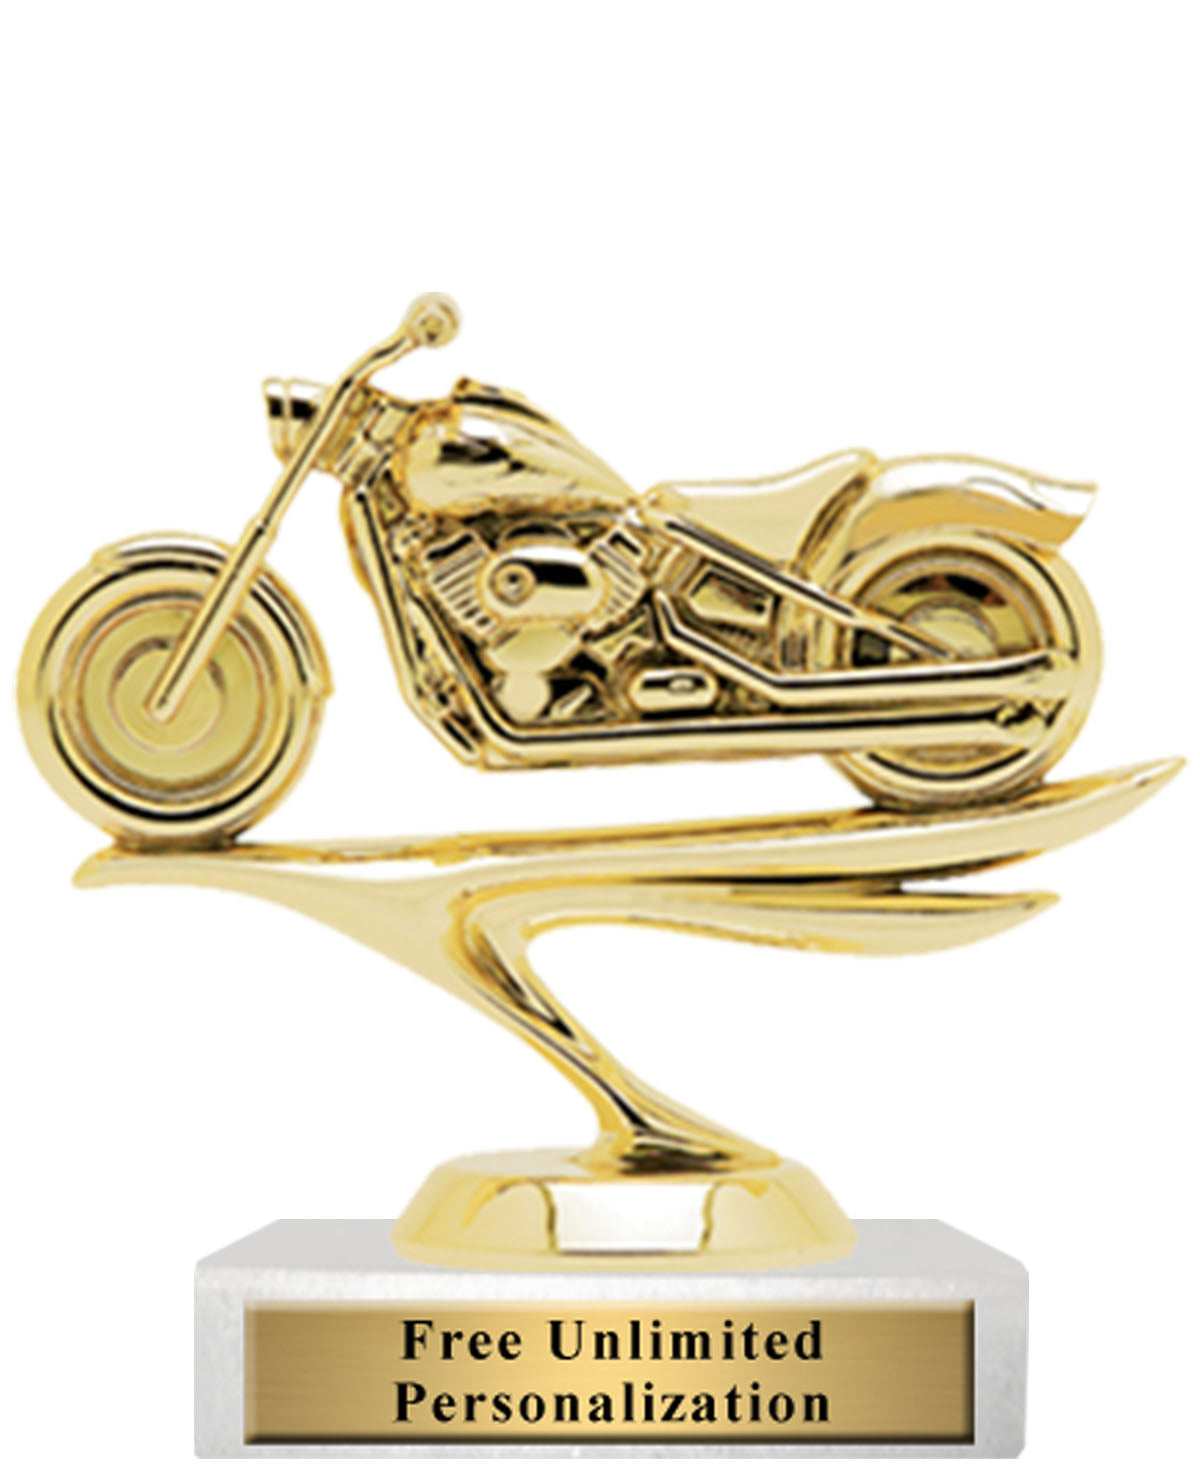 Standard Soft Tail Motorcycle Trophy at K2 Awards